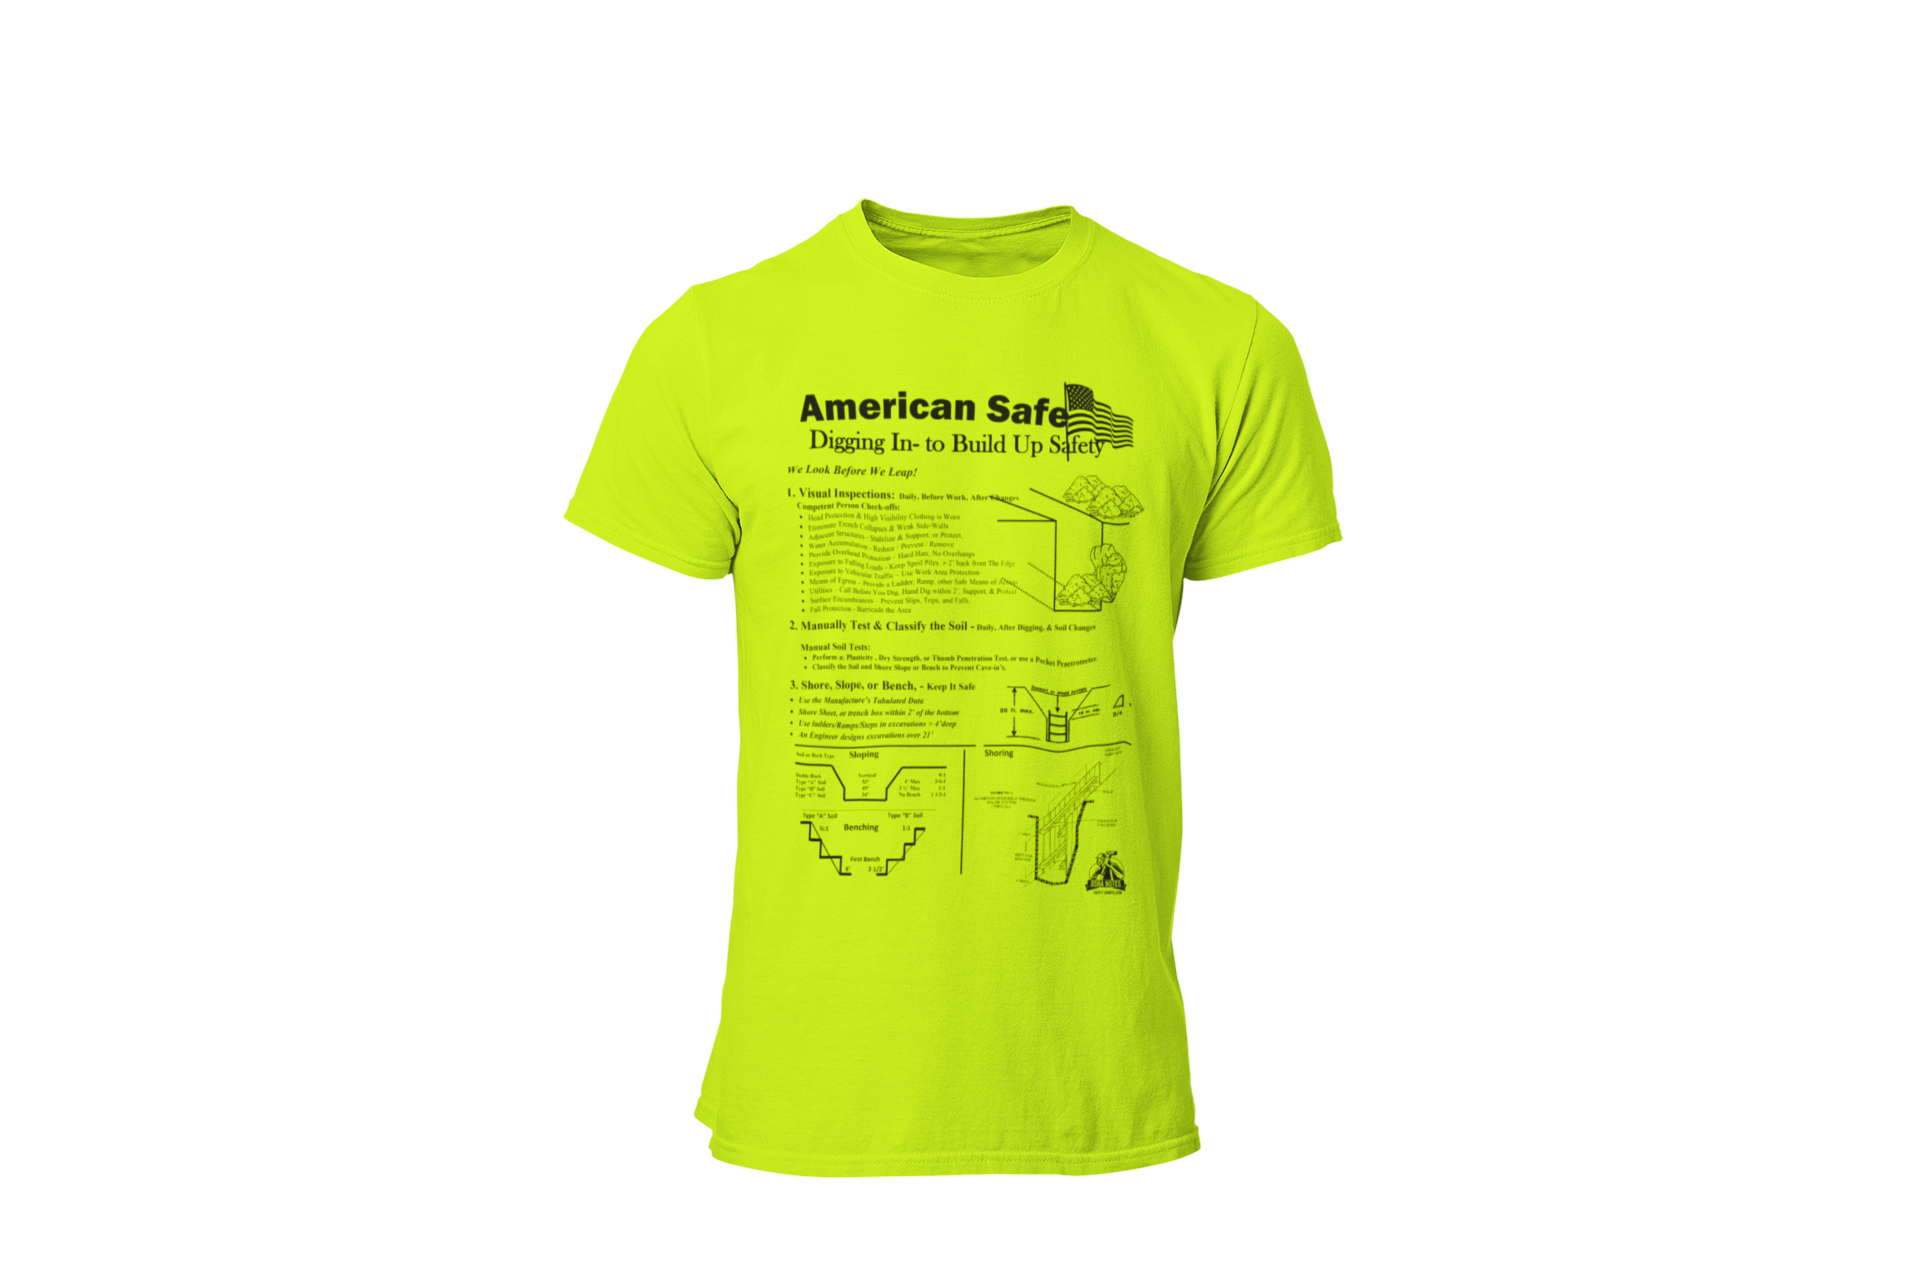 High Visibility Safety T-shirt  Short Sleeve Safety Shirts, Green